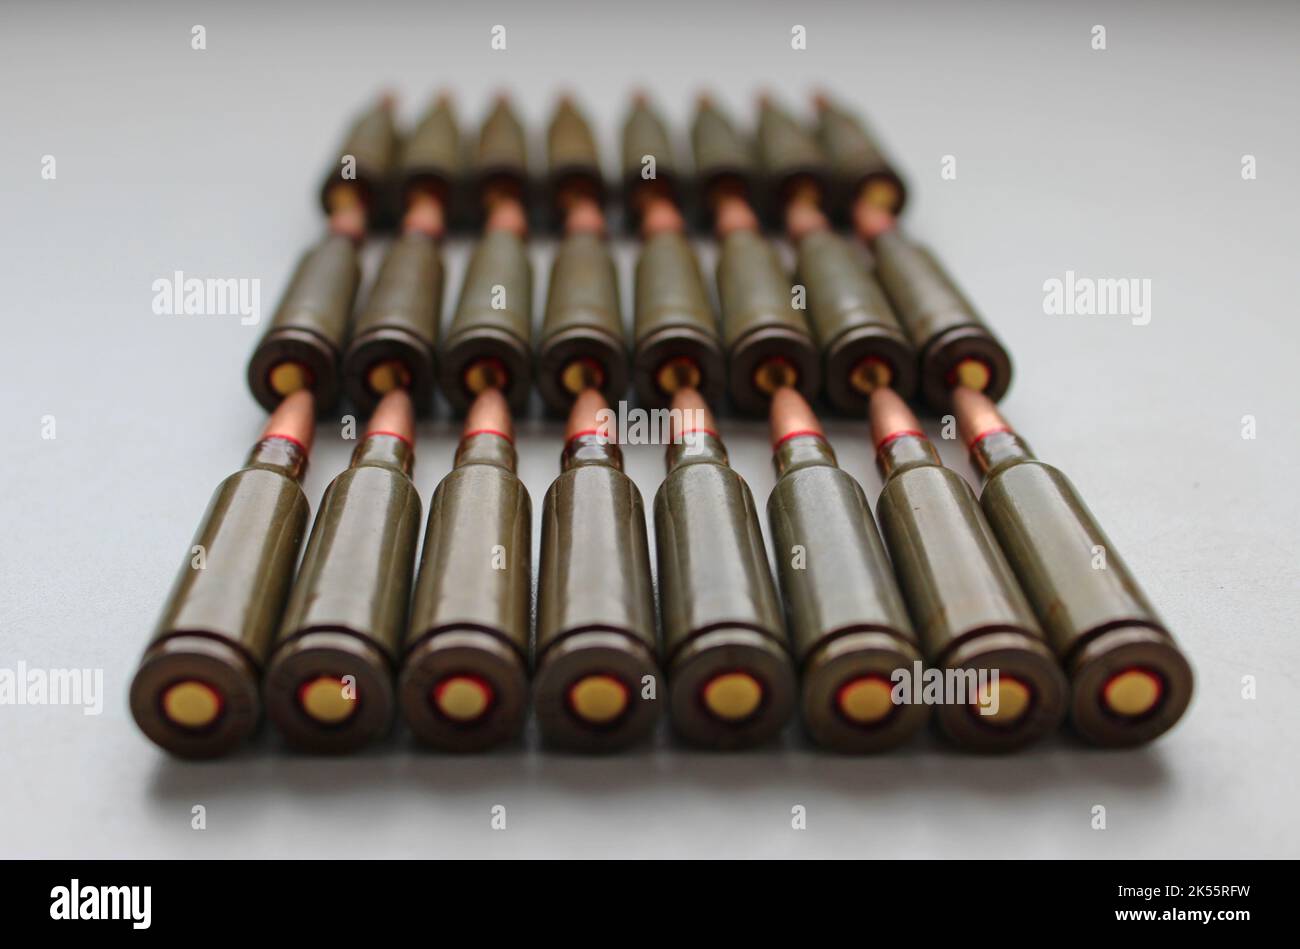 Closeup View Of live ammunition capsules for assault rifle laid out in rows on white background Stock Photo